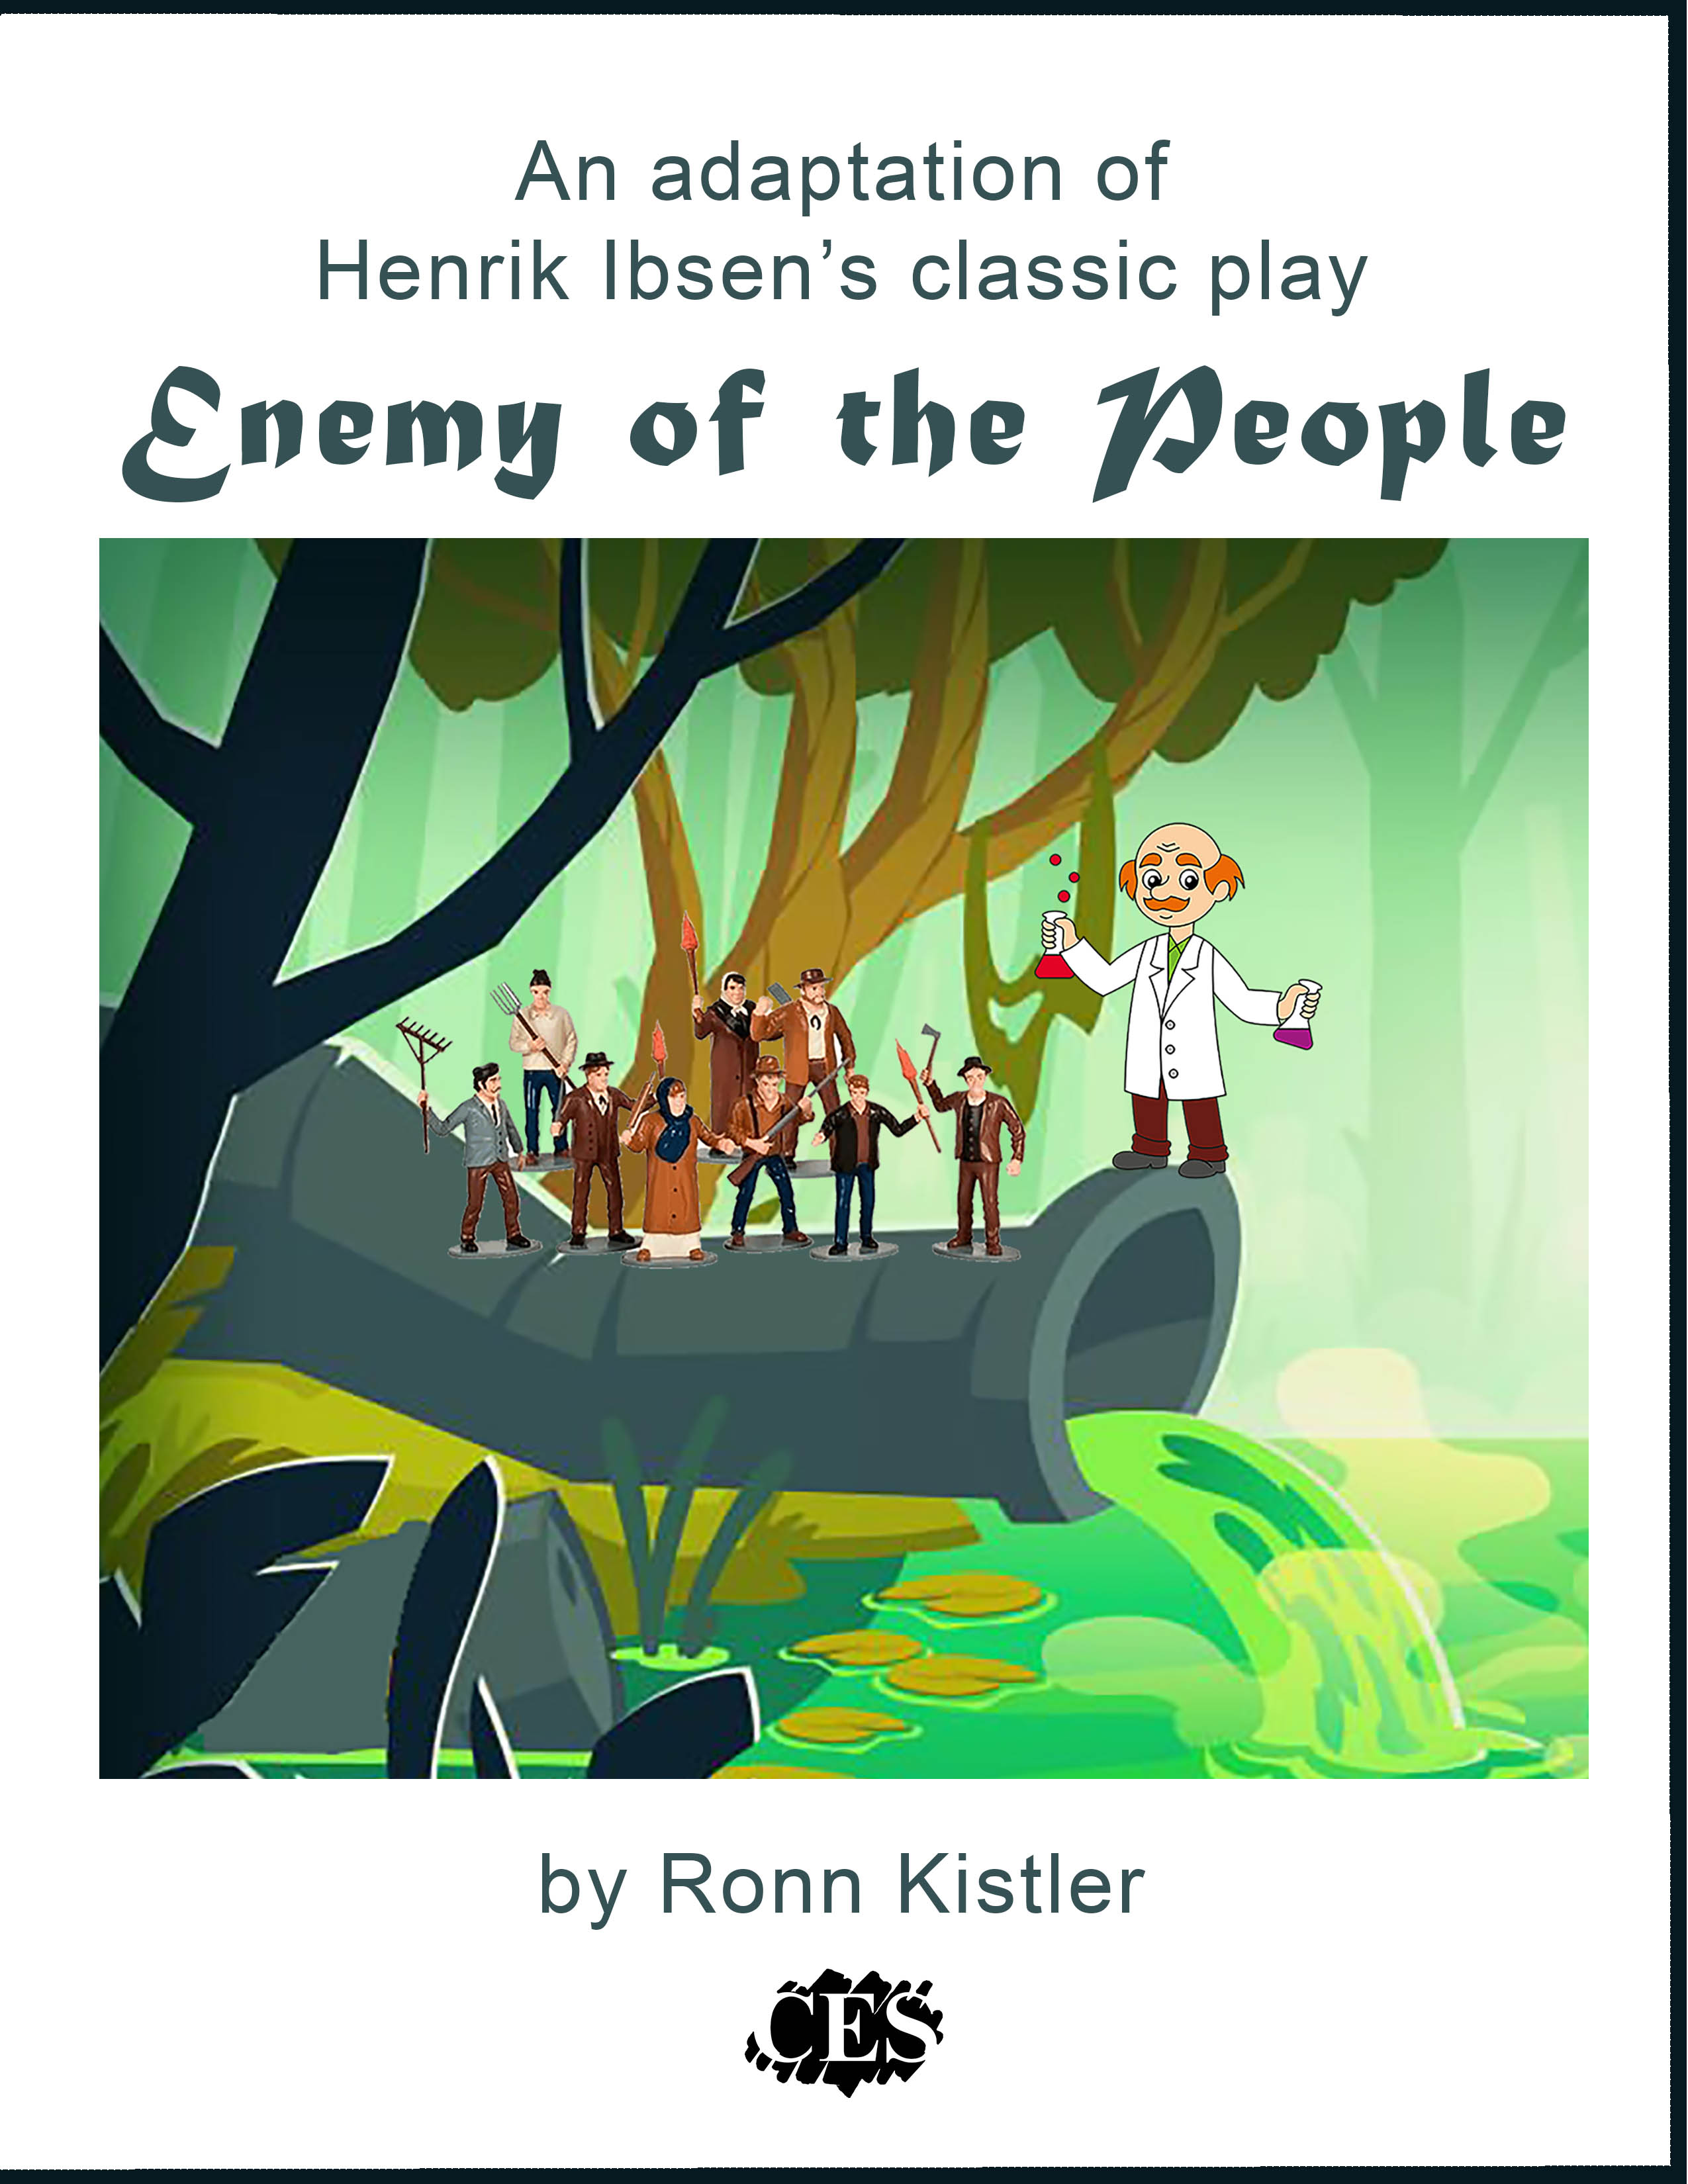 Enemy of the People play Script-
An An adaptation of Henrik Ibsen's classic drama script cover